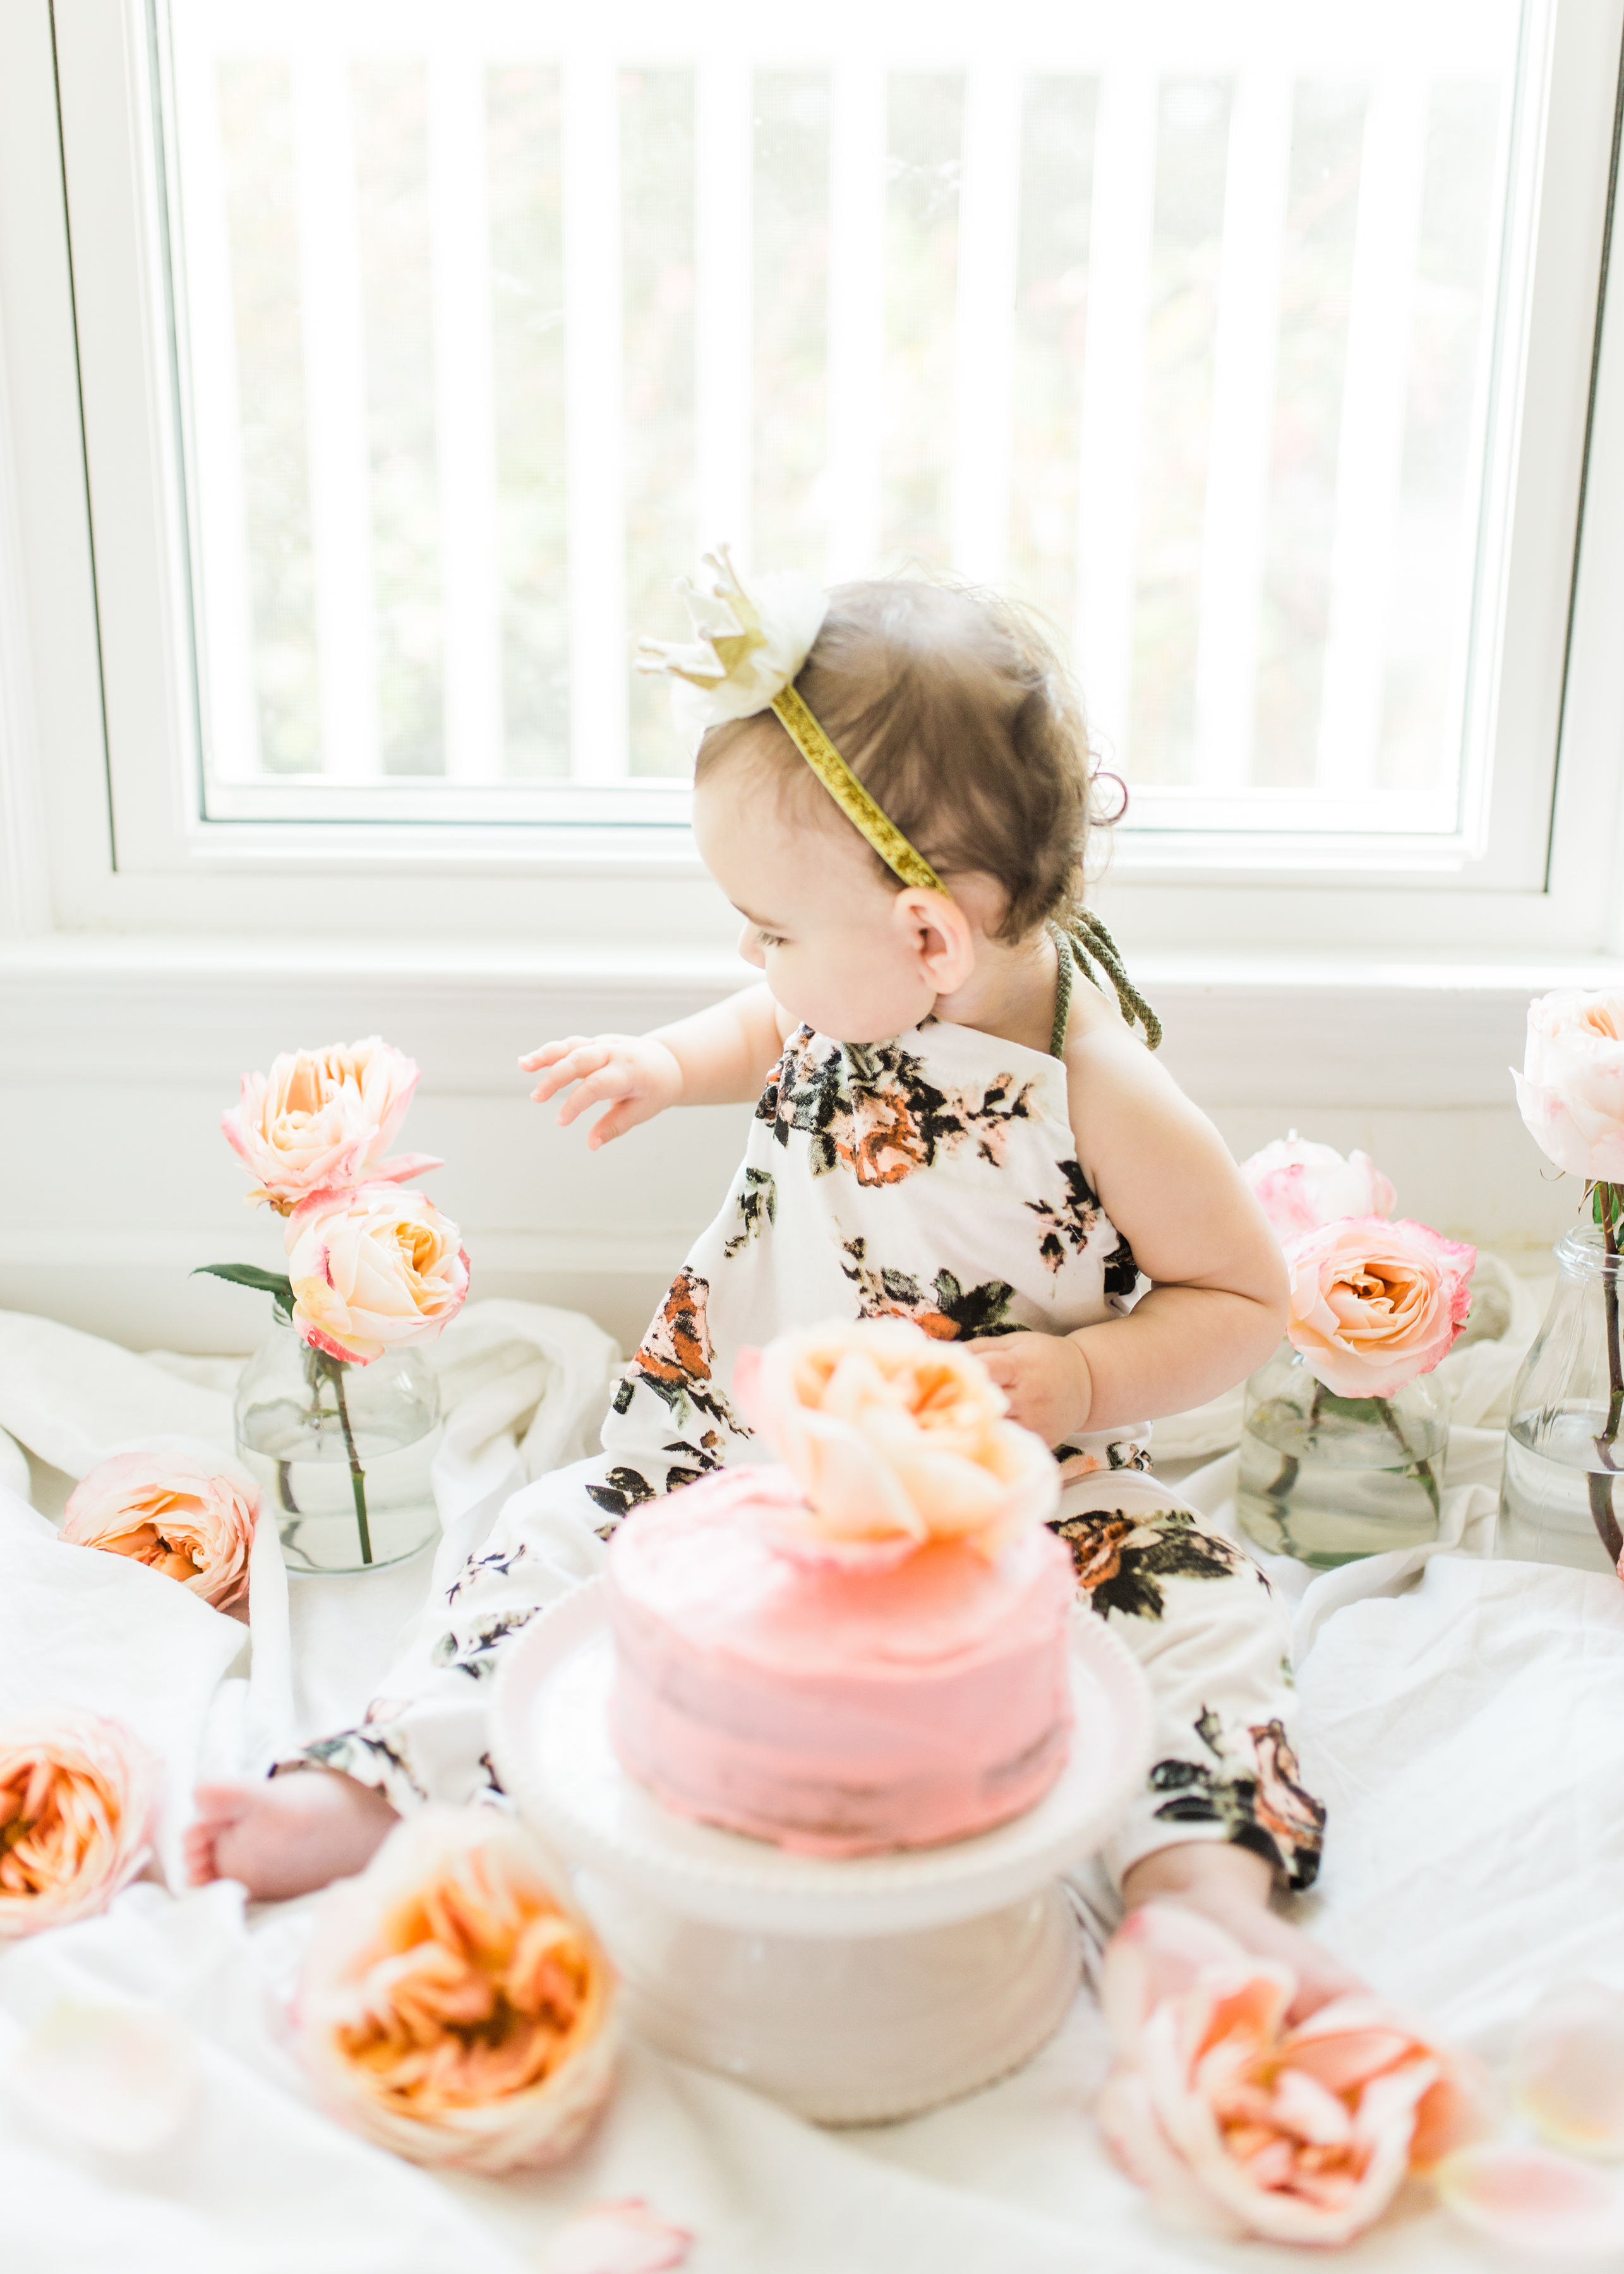 Looking for a little inspiration for baby's first birthday cake smash photo shoot? We're keeping it simple and adorable for Emmeline's cake smash, plus, we're sharing our favorite dairy-free vanilla crazy cake recipe! Click through for the details and #recipe. #firstbirthday #babybirthday #cakesmash #babycakesmash #cakesmashrecipe #firstbirthdaycake | glitterinc.com | @glitterinc